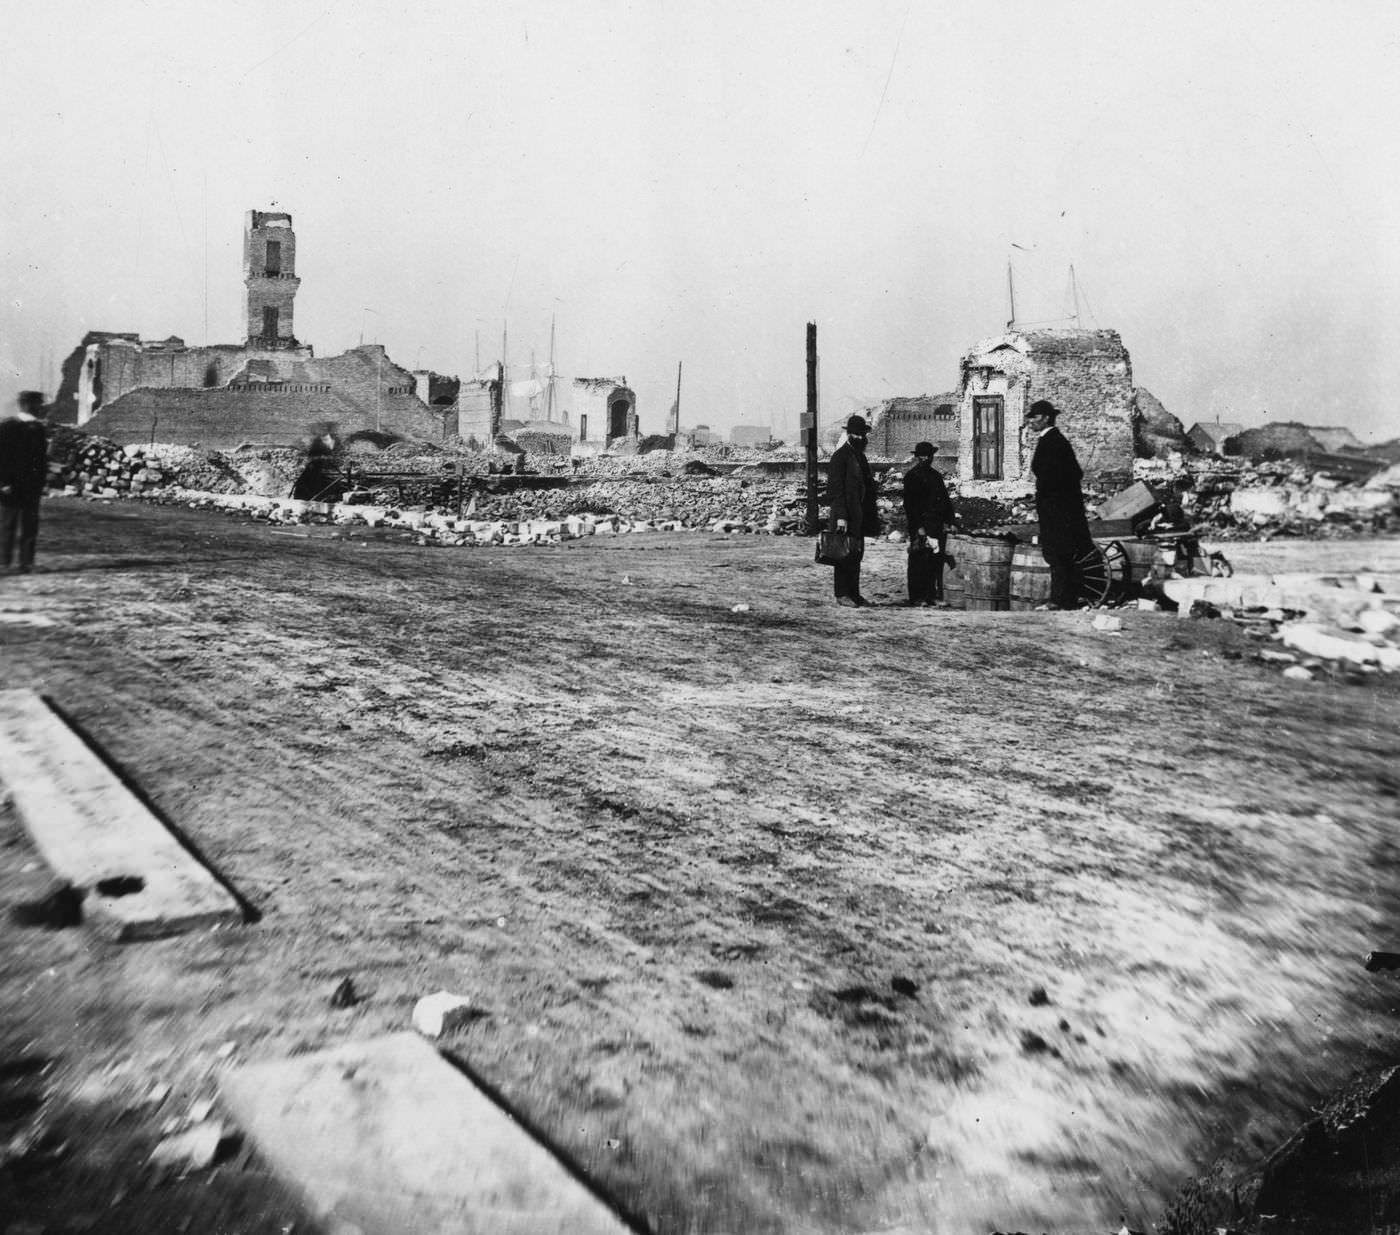 A view looking north at Franklin and Madison streets in Chicago after the Great Chicago Fire in 1871.